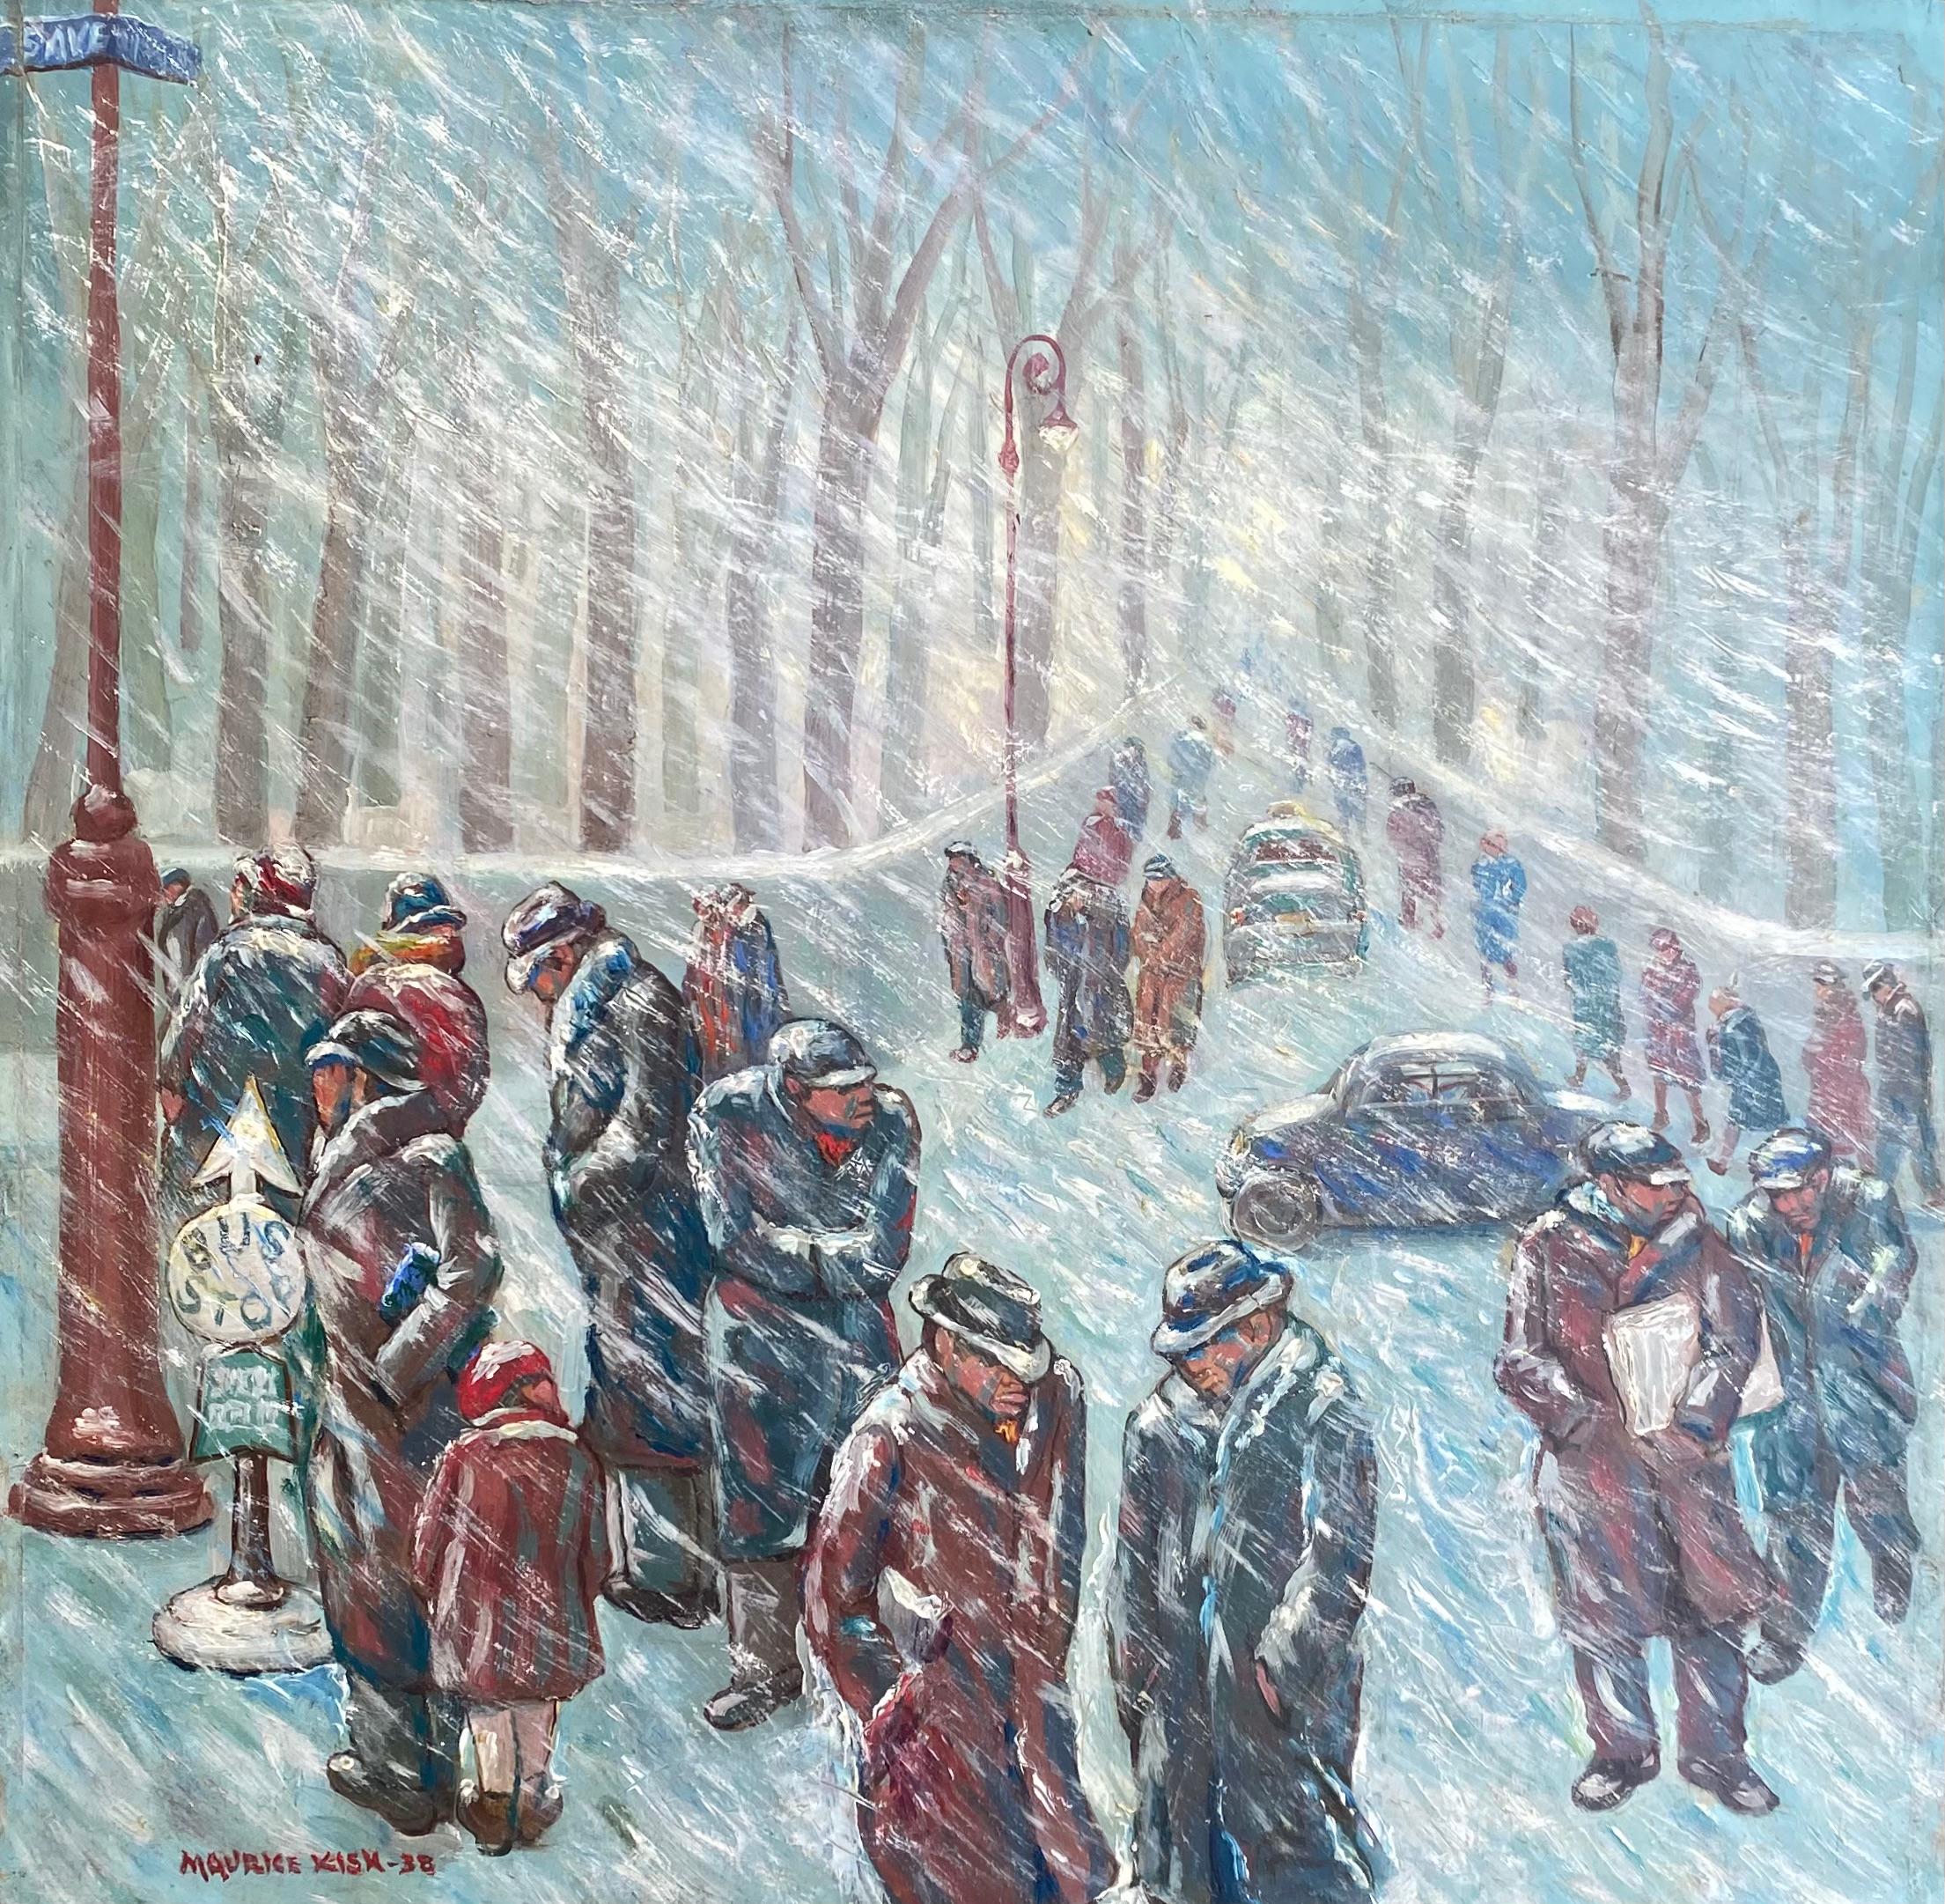 Waiting for the Bus in a Blizzard- WPA American Scene 1938 NYC Modernism Realism